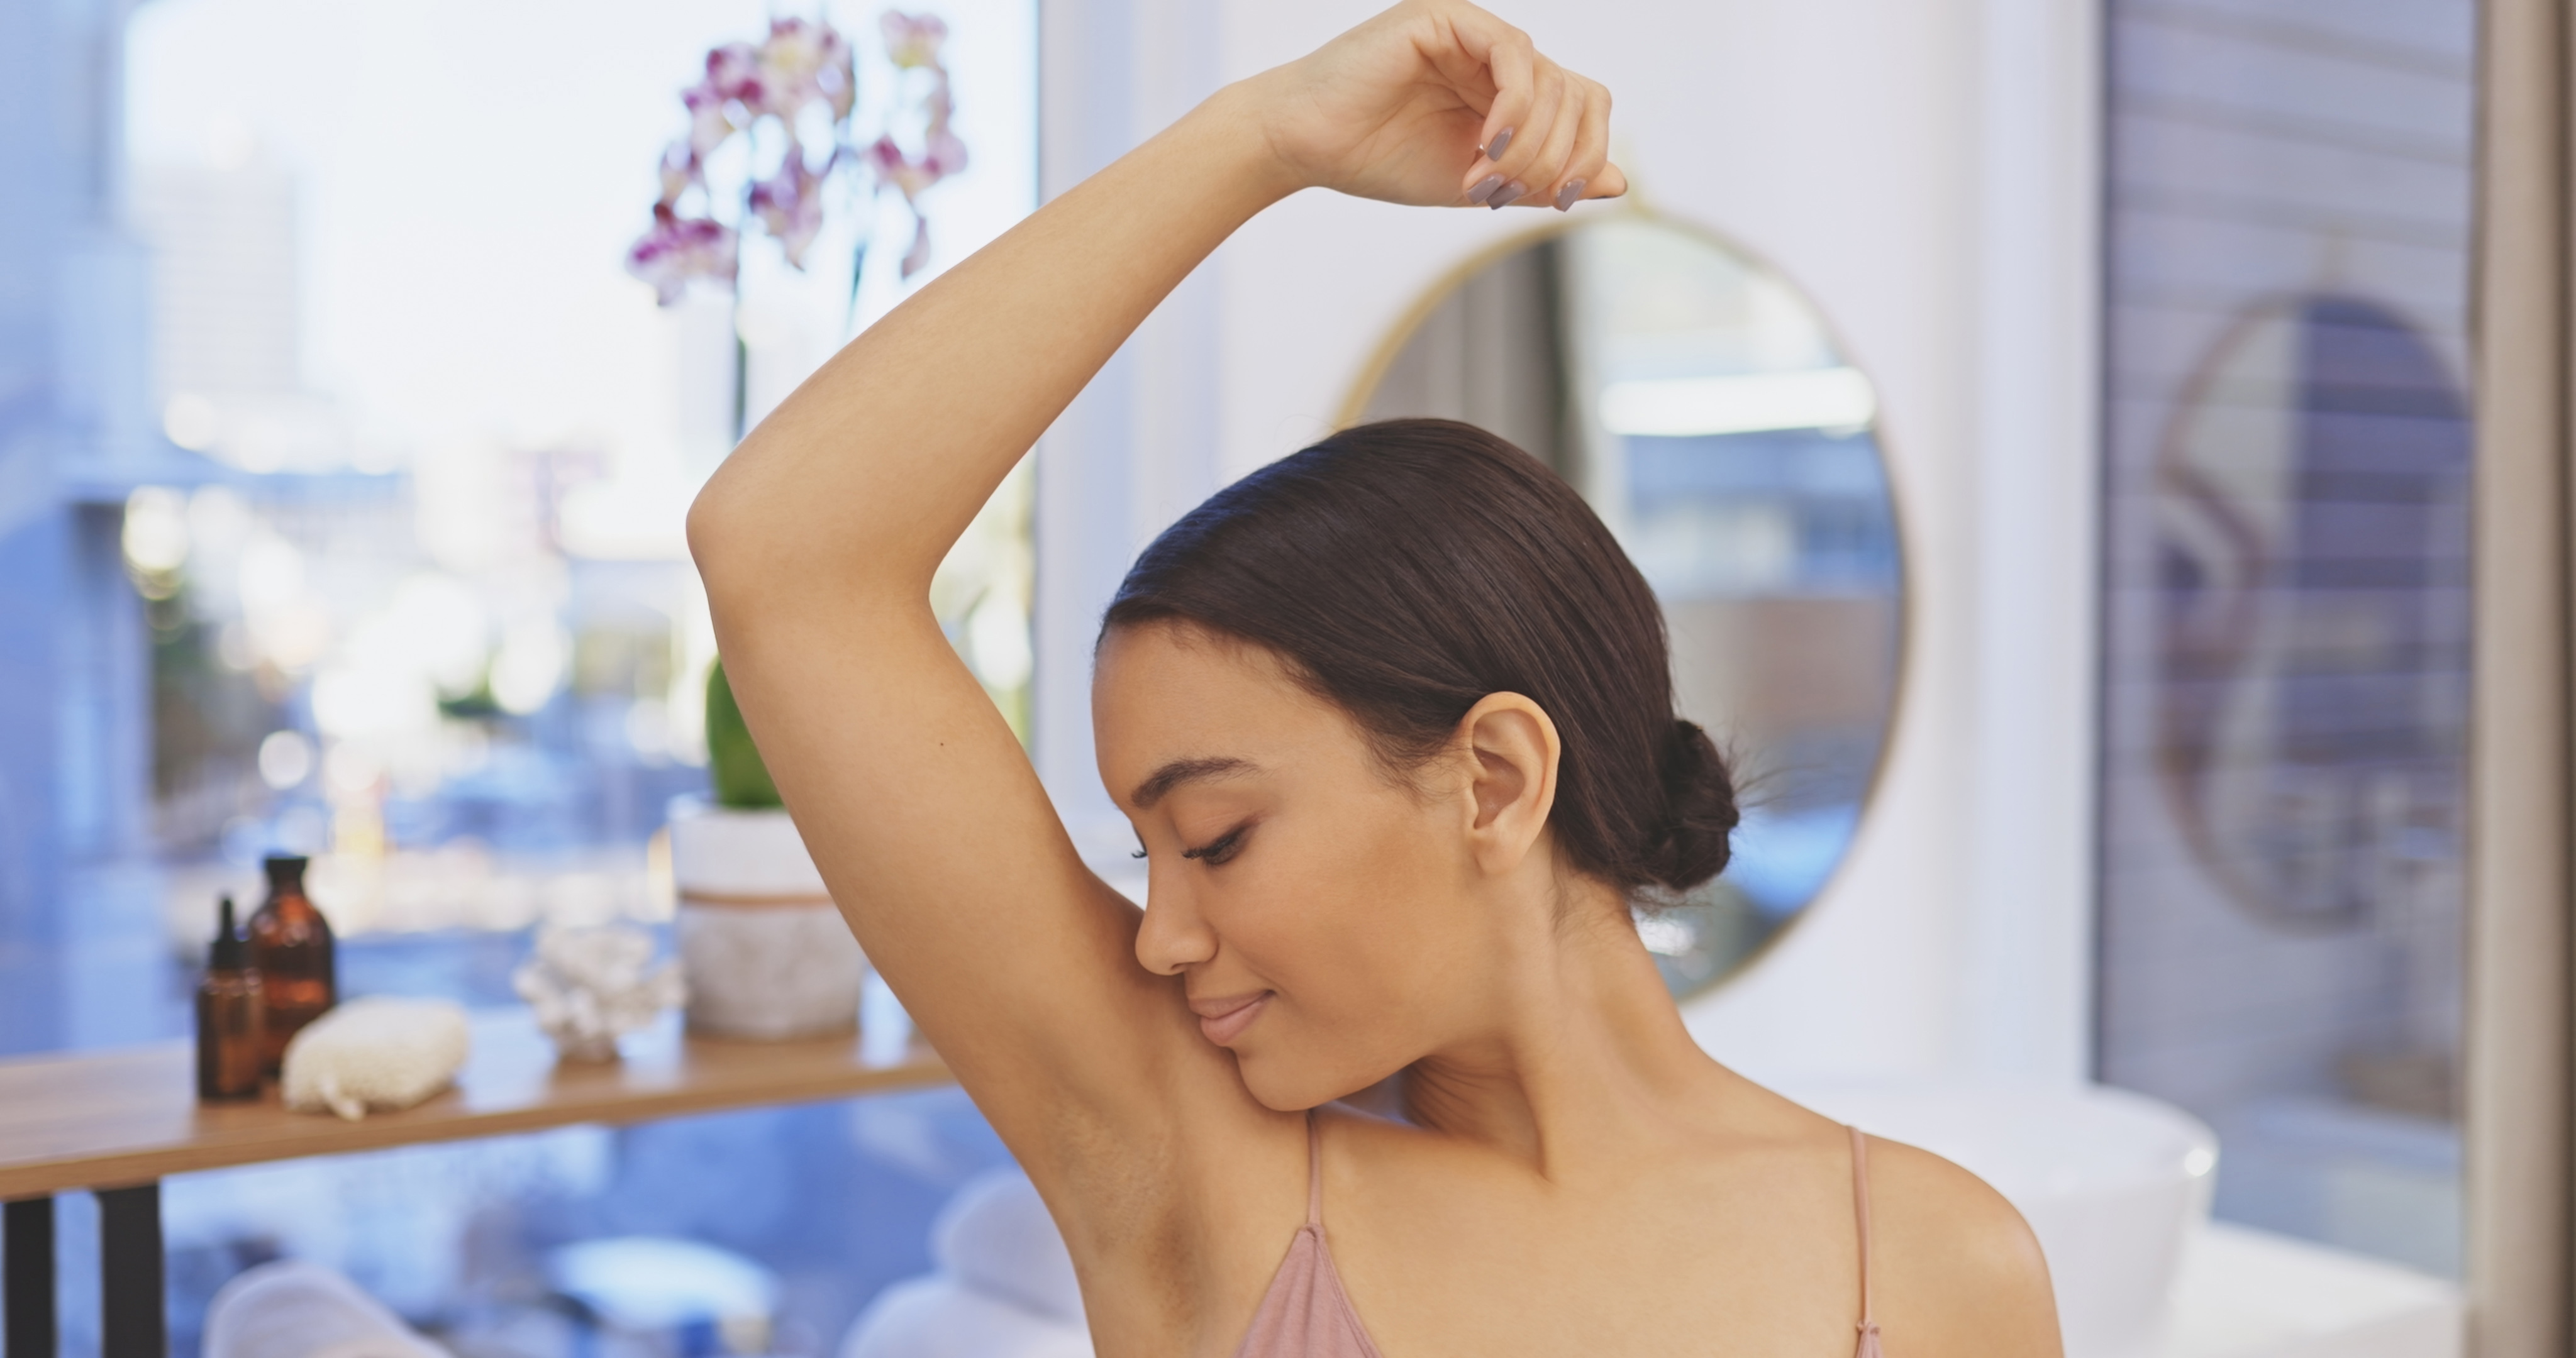 Why Does One Armpit Smell Worse than the Other? 6 Reasons